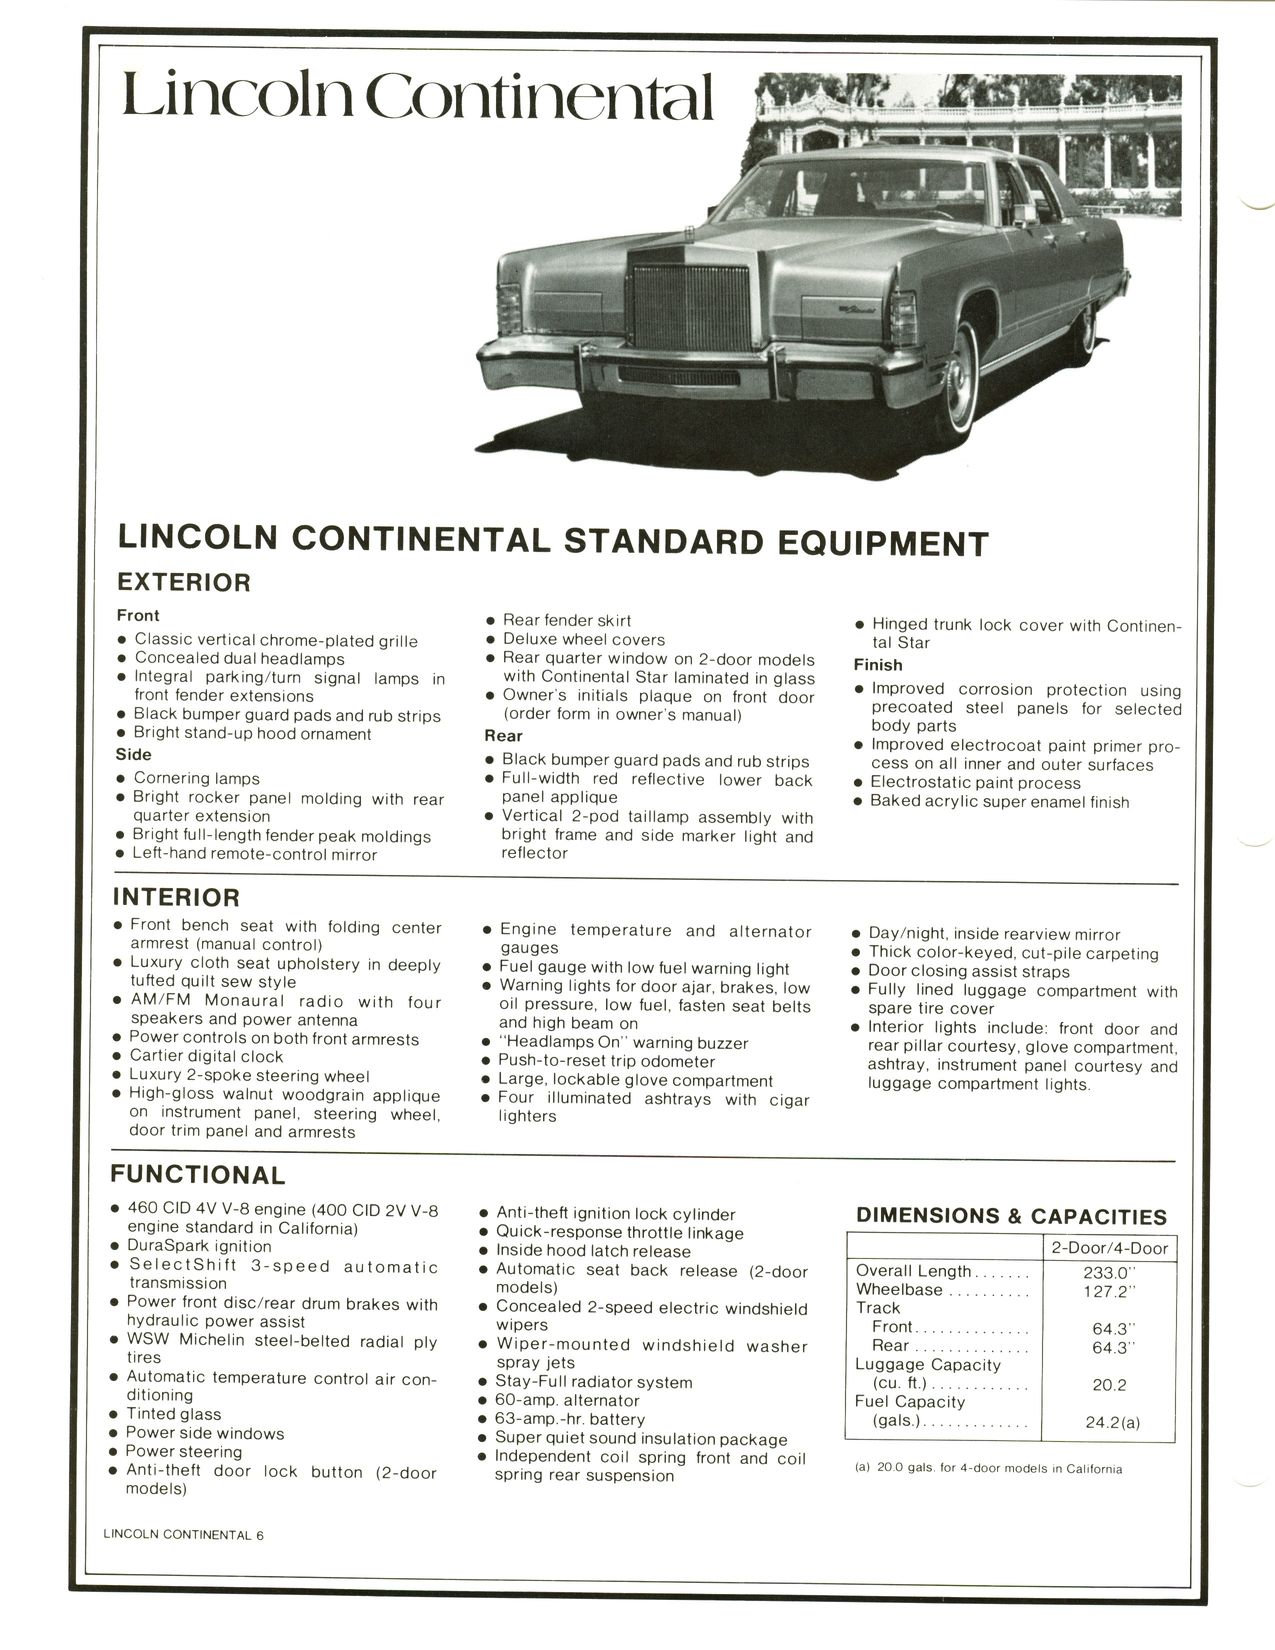 1977 Lincoln Continental Mark V Product Facts Book Page 31